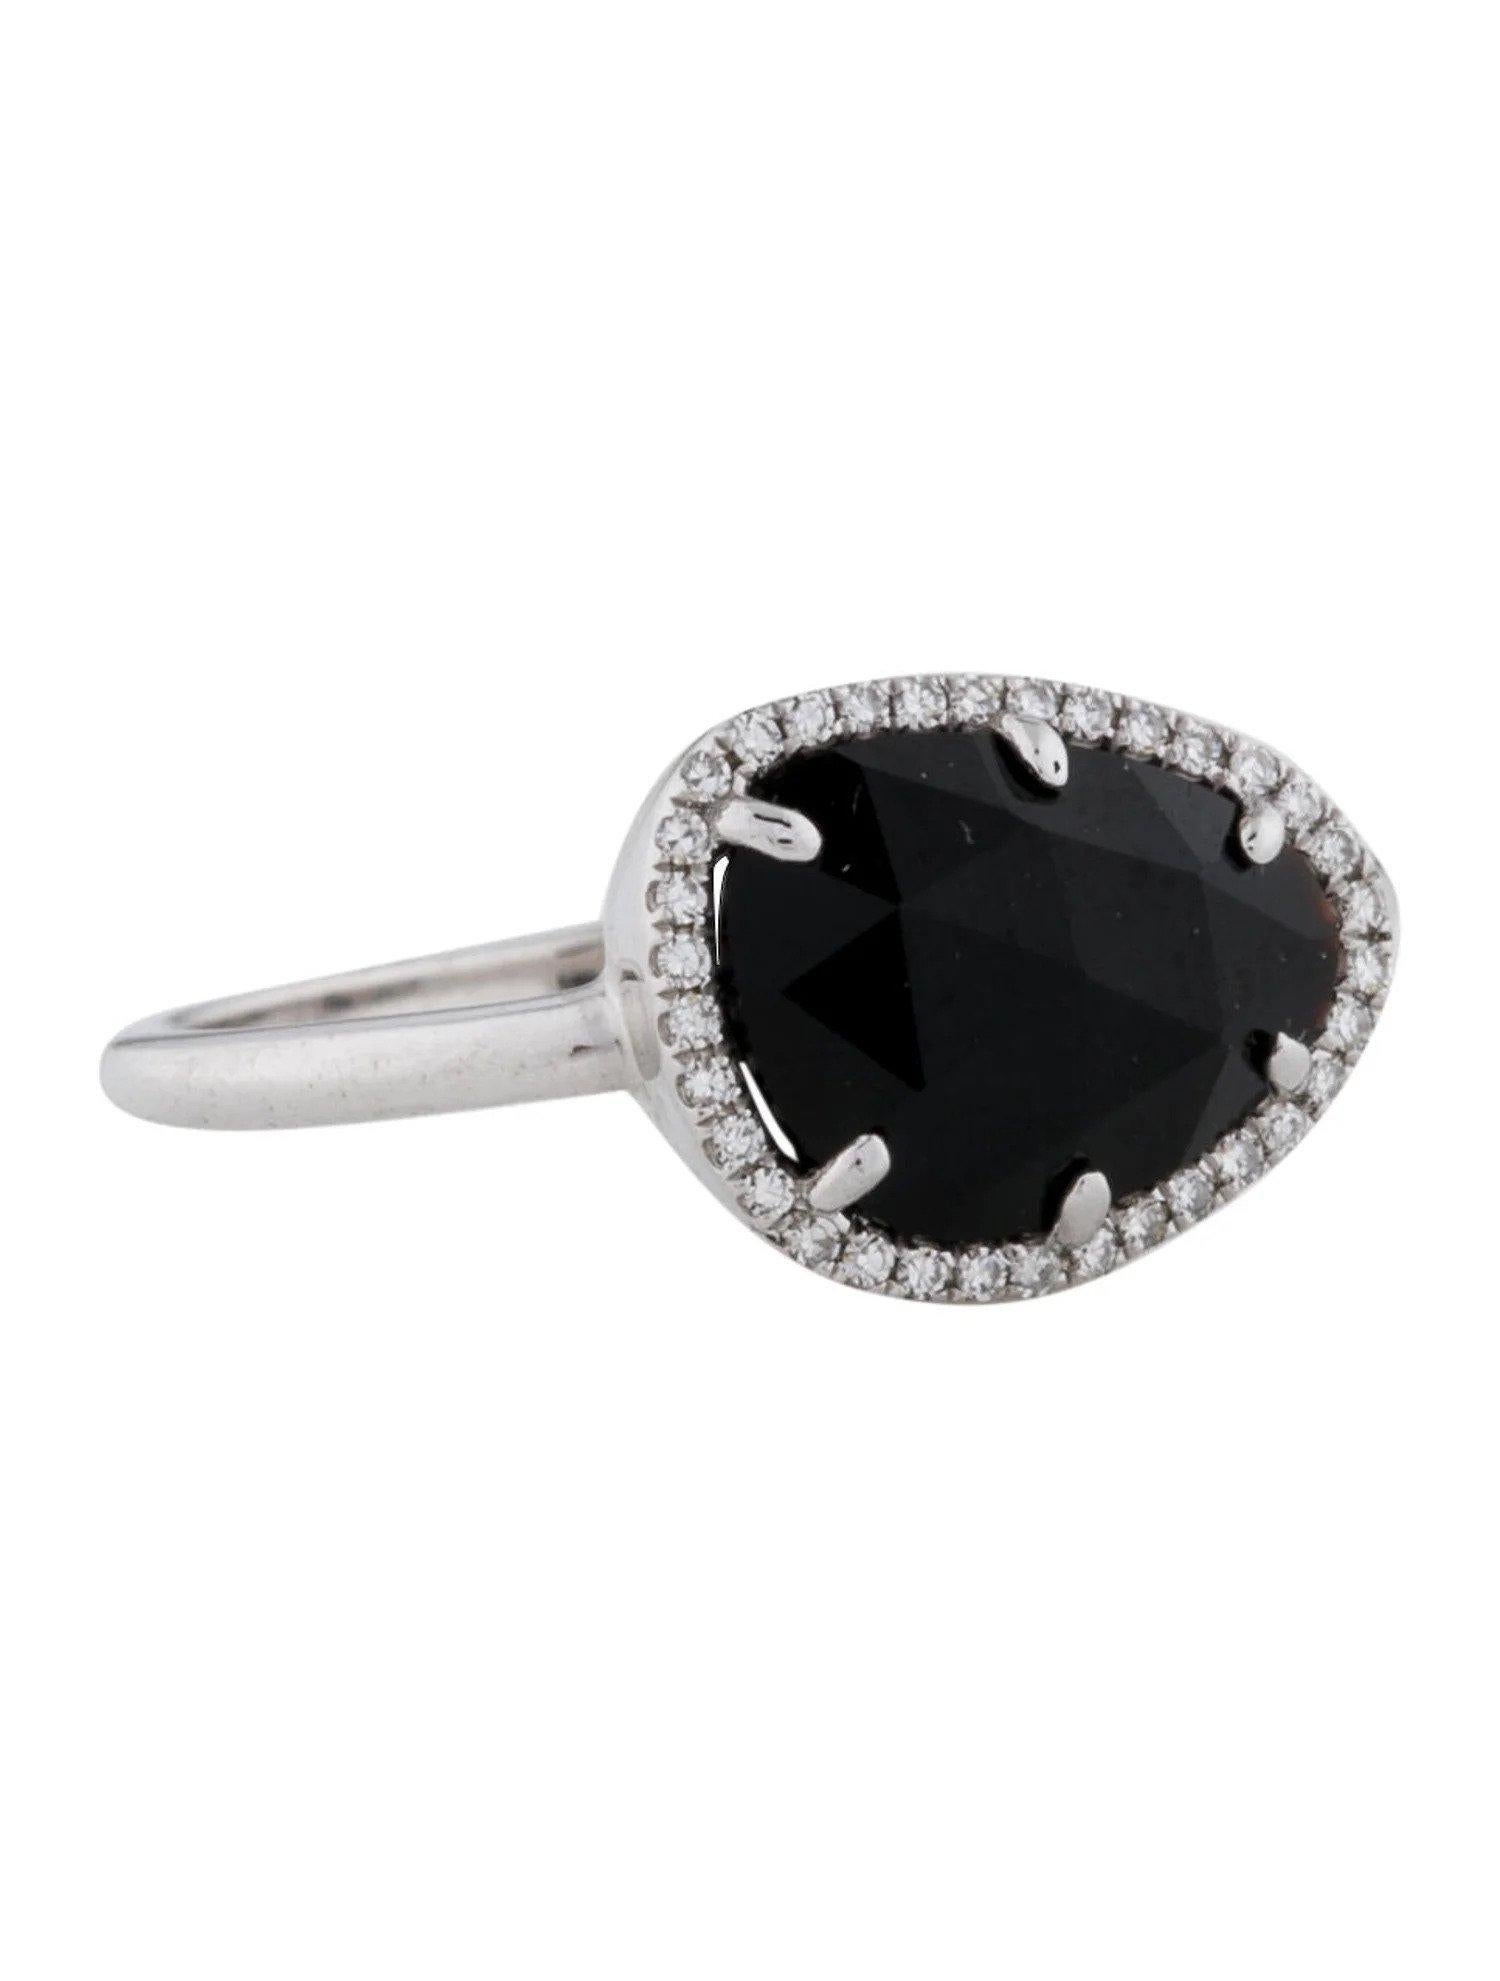 1.56 Carat Onyx & Diamond White Gold Ring In New Condition For Sale In Great Neck, NY